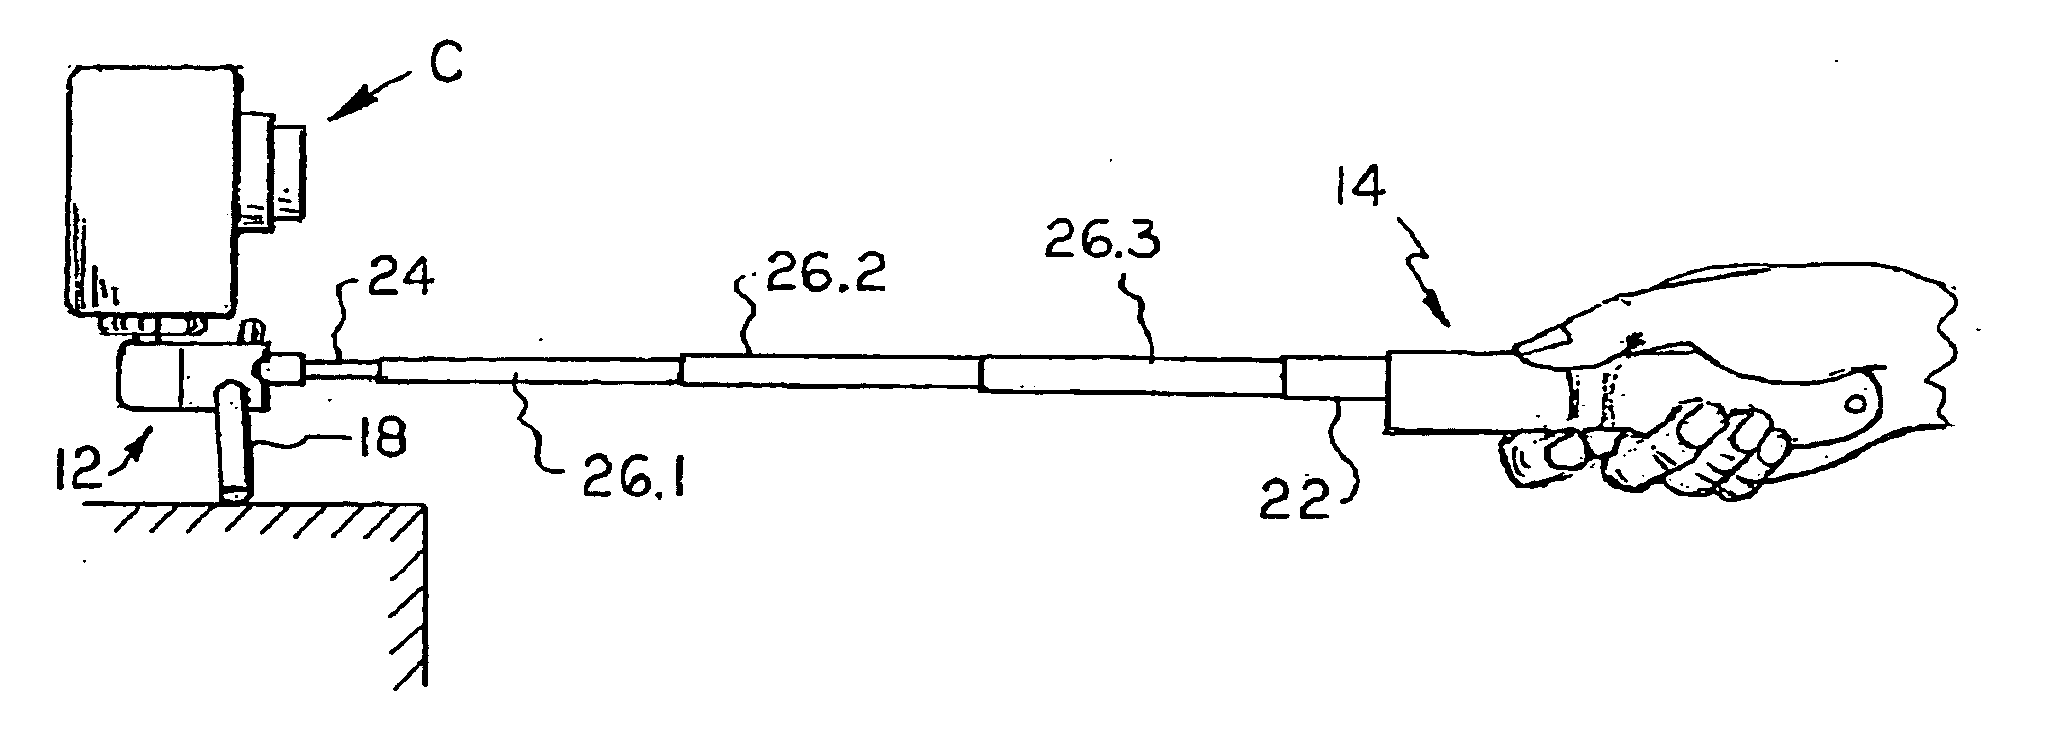 Apparatus for supporting a camera by hand